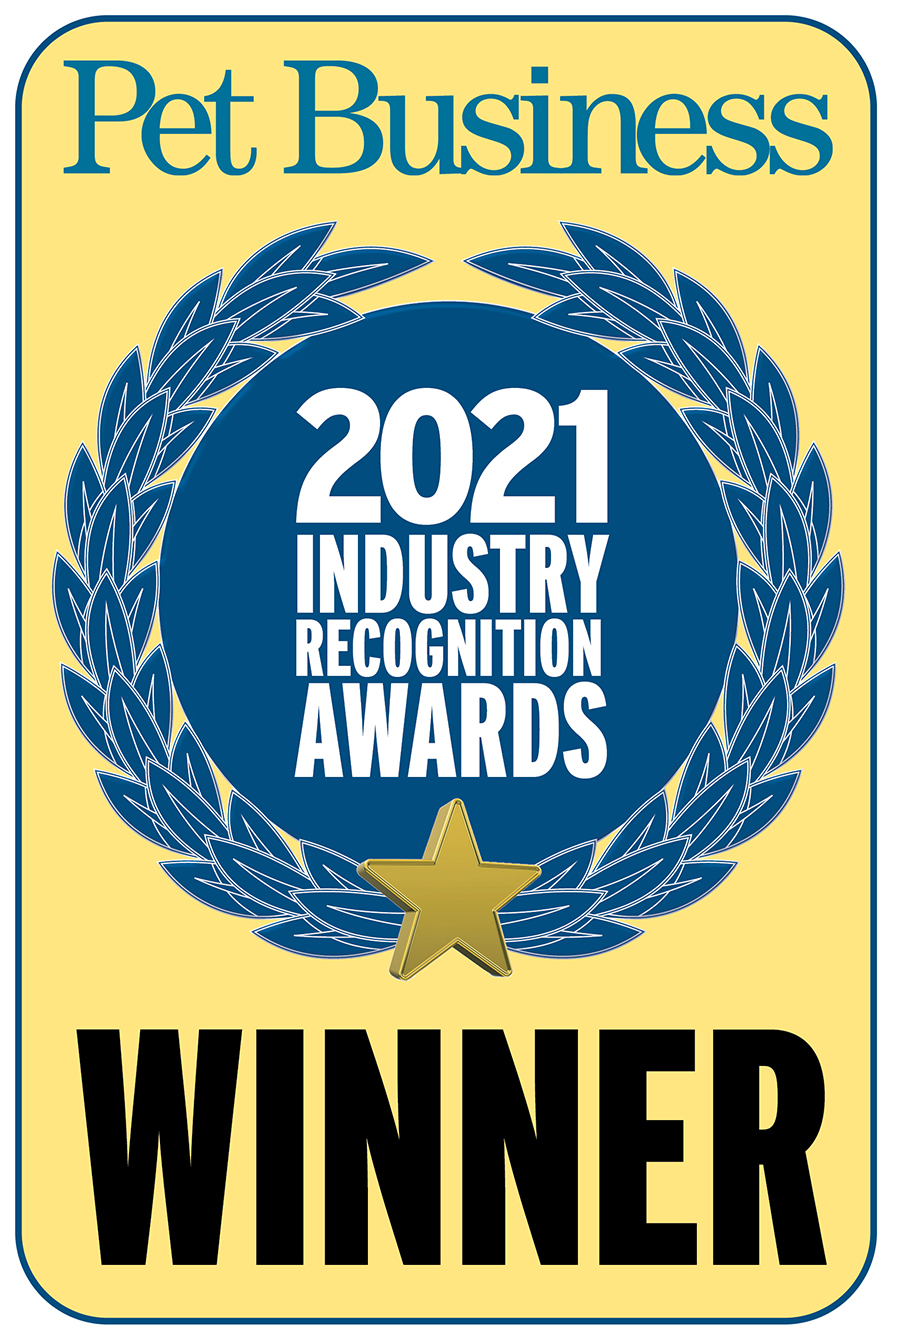 Pet Business 2021 Industry Recognition Awards